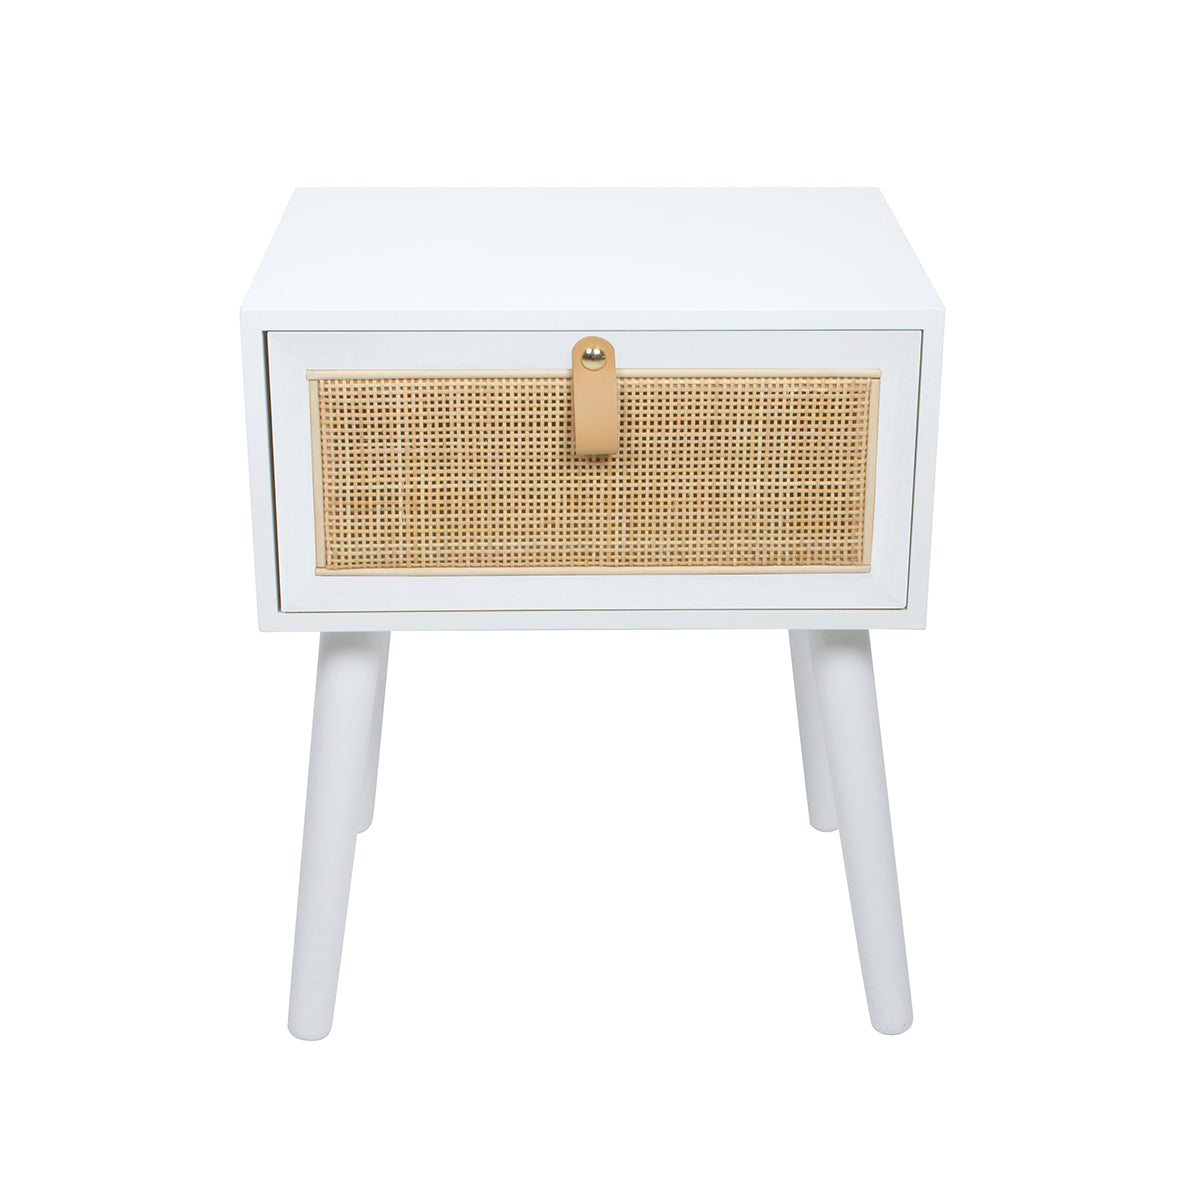 Hilla Bed Side Table Rattan White
 49 x 40 x 37cm